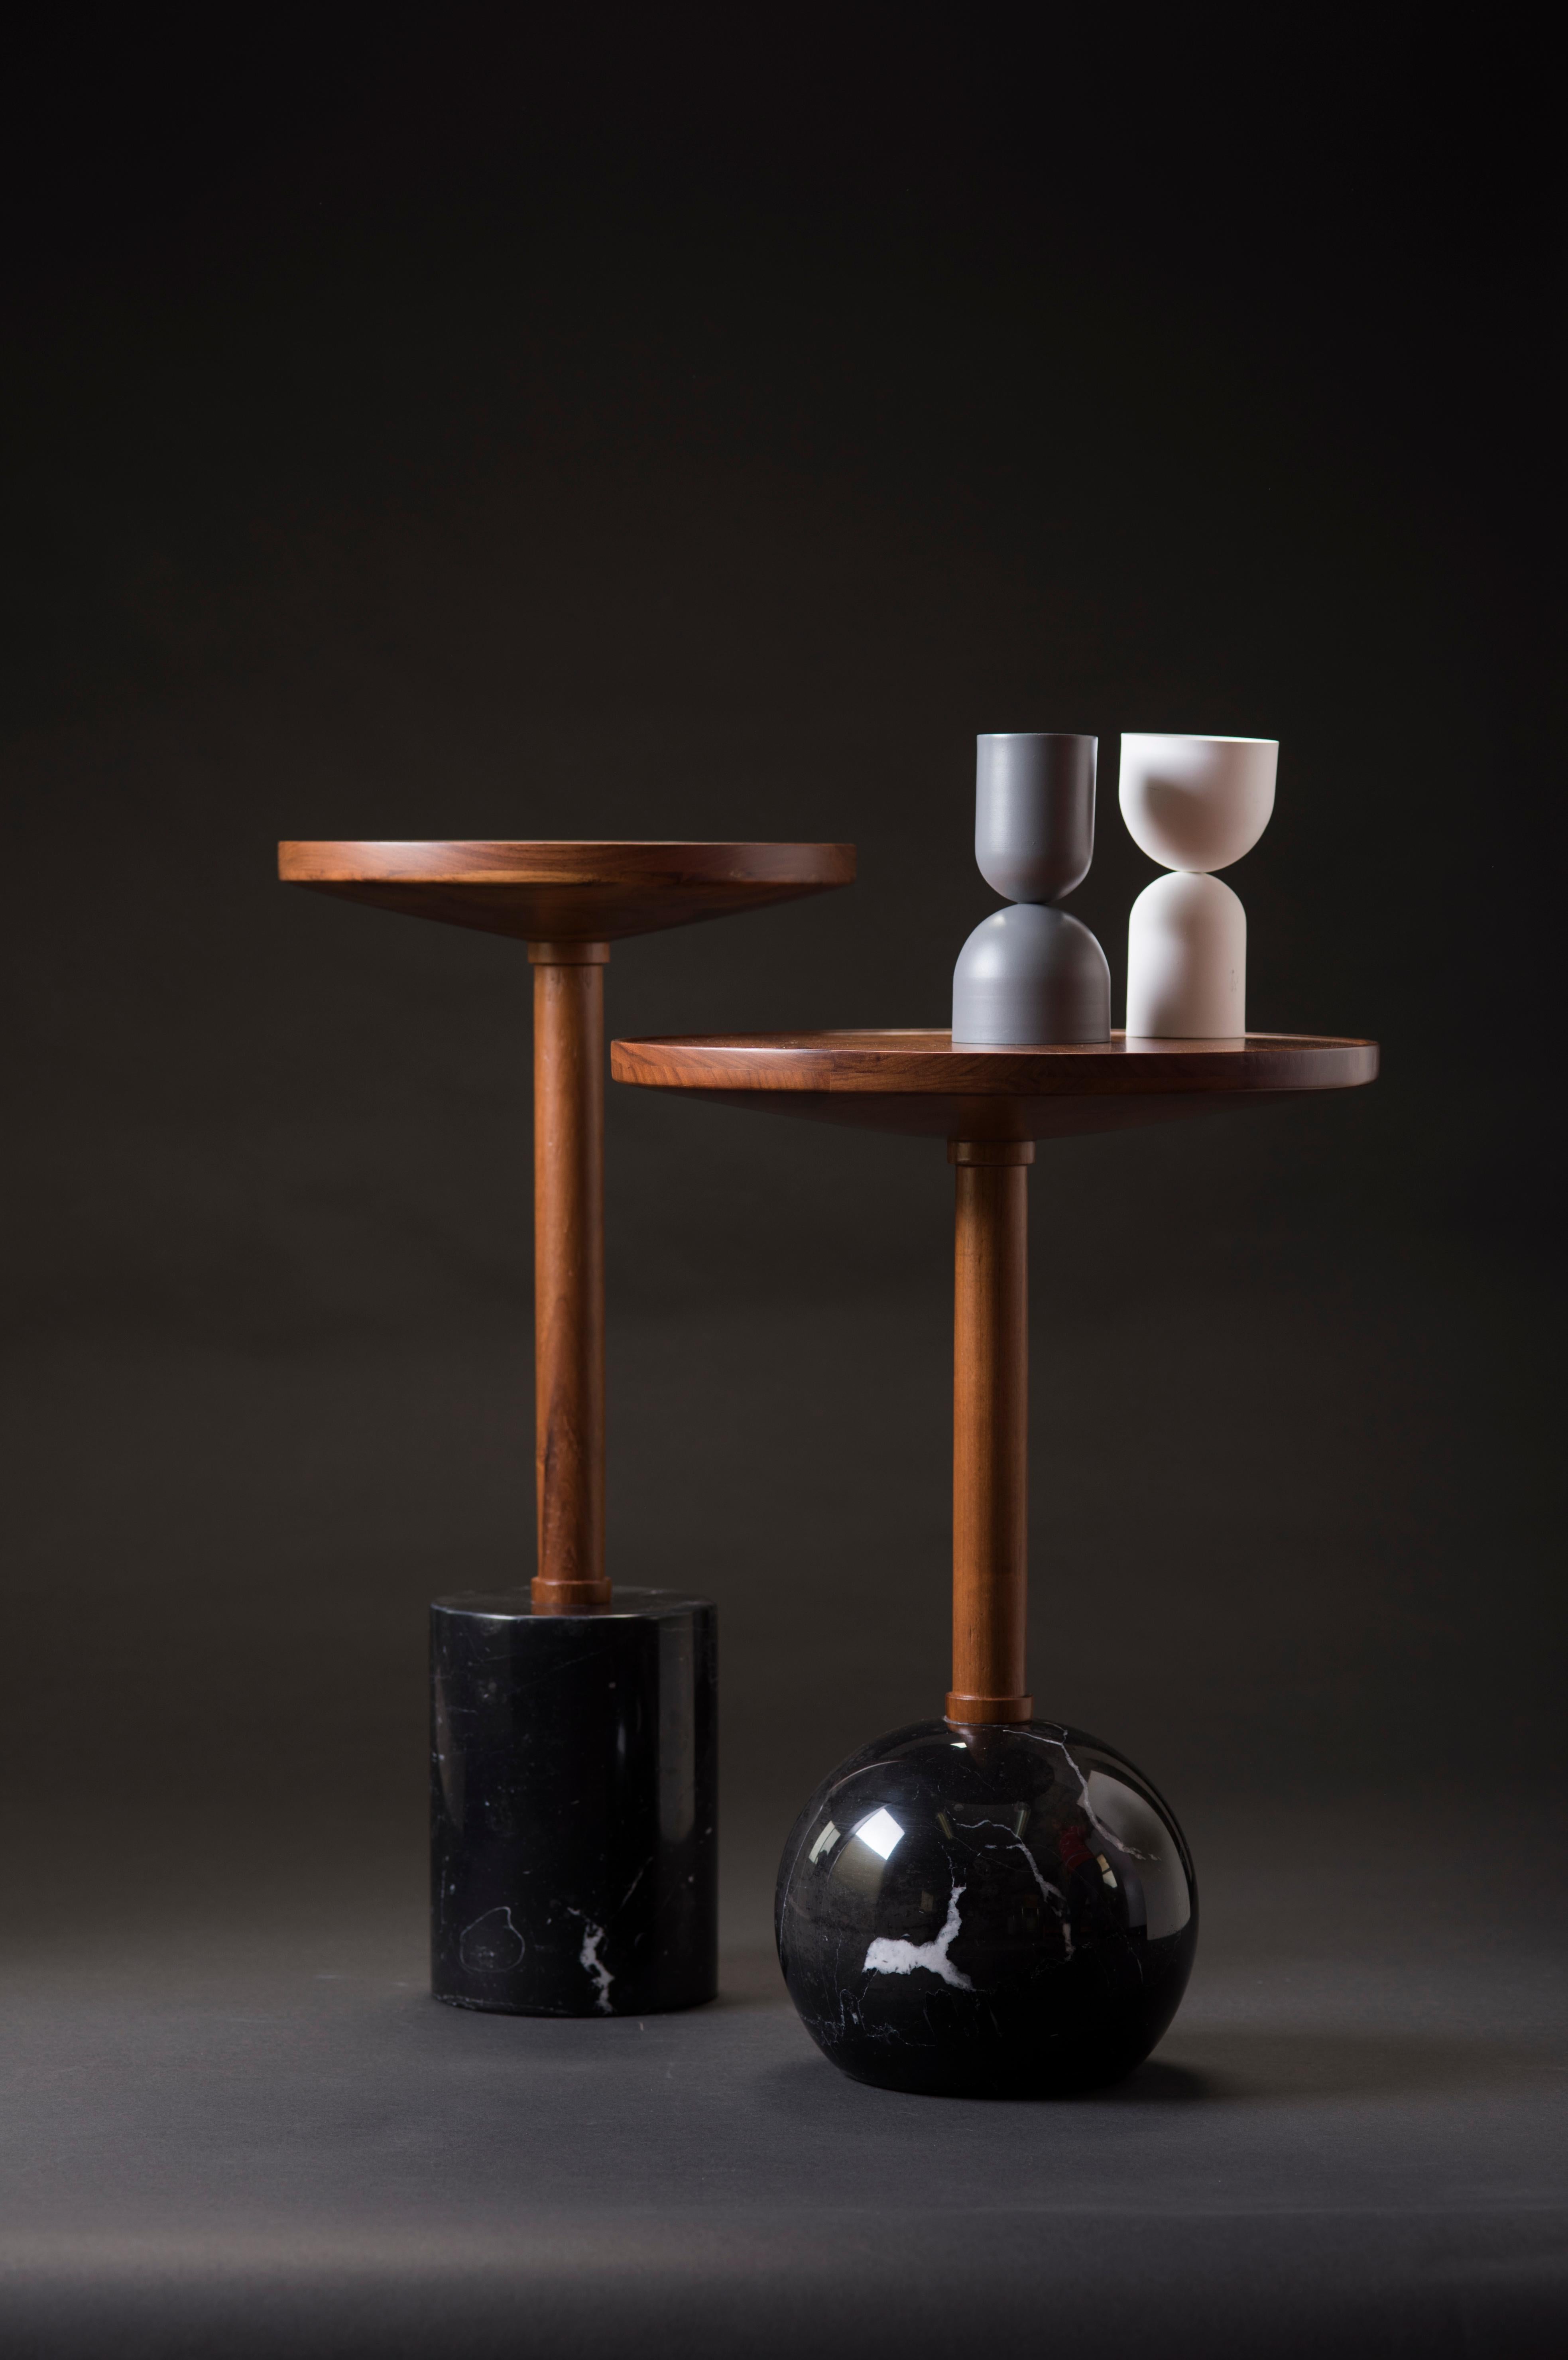 Honoring the process of craftsmanship, geometry makes poetry in the Mesas Monterrey. Both tables are turned by hand; the bases are made of a marble cylinder and sphere, the tops are made of solid tzalam wood in two different diameters. With